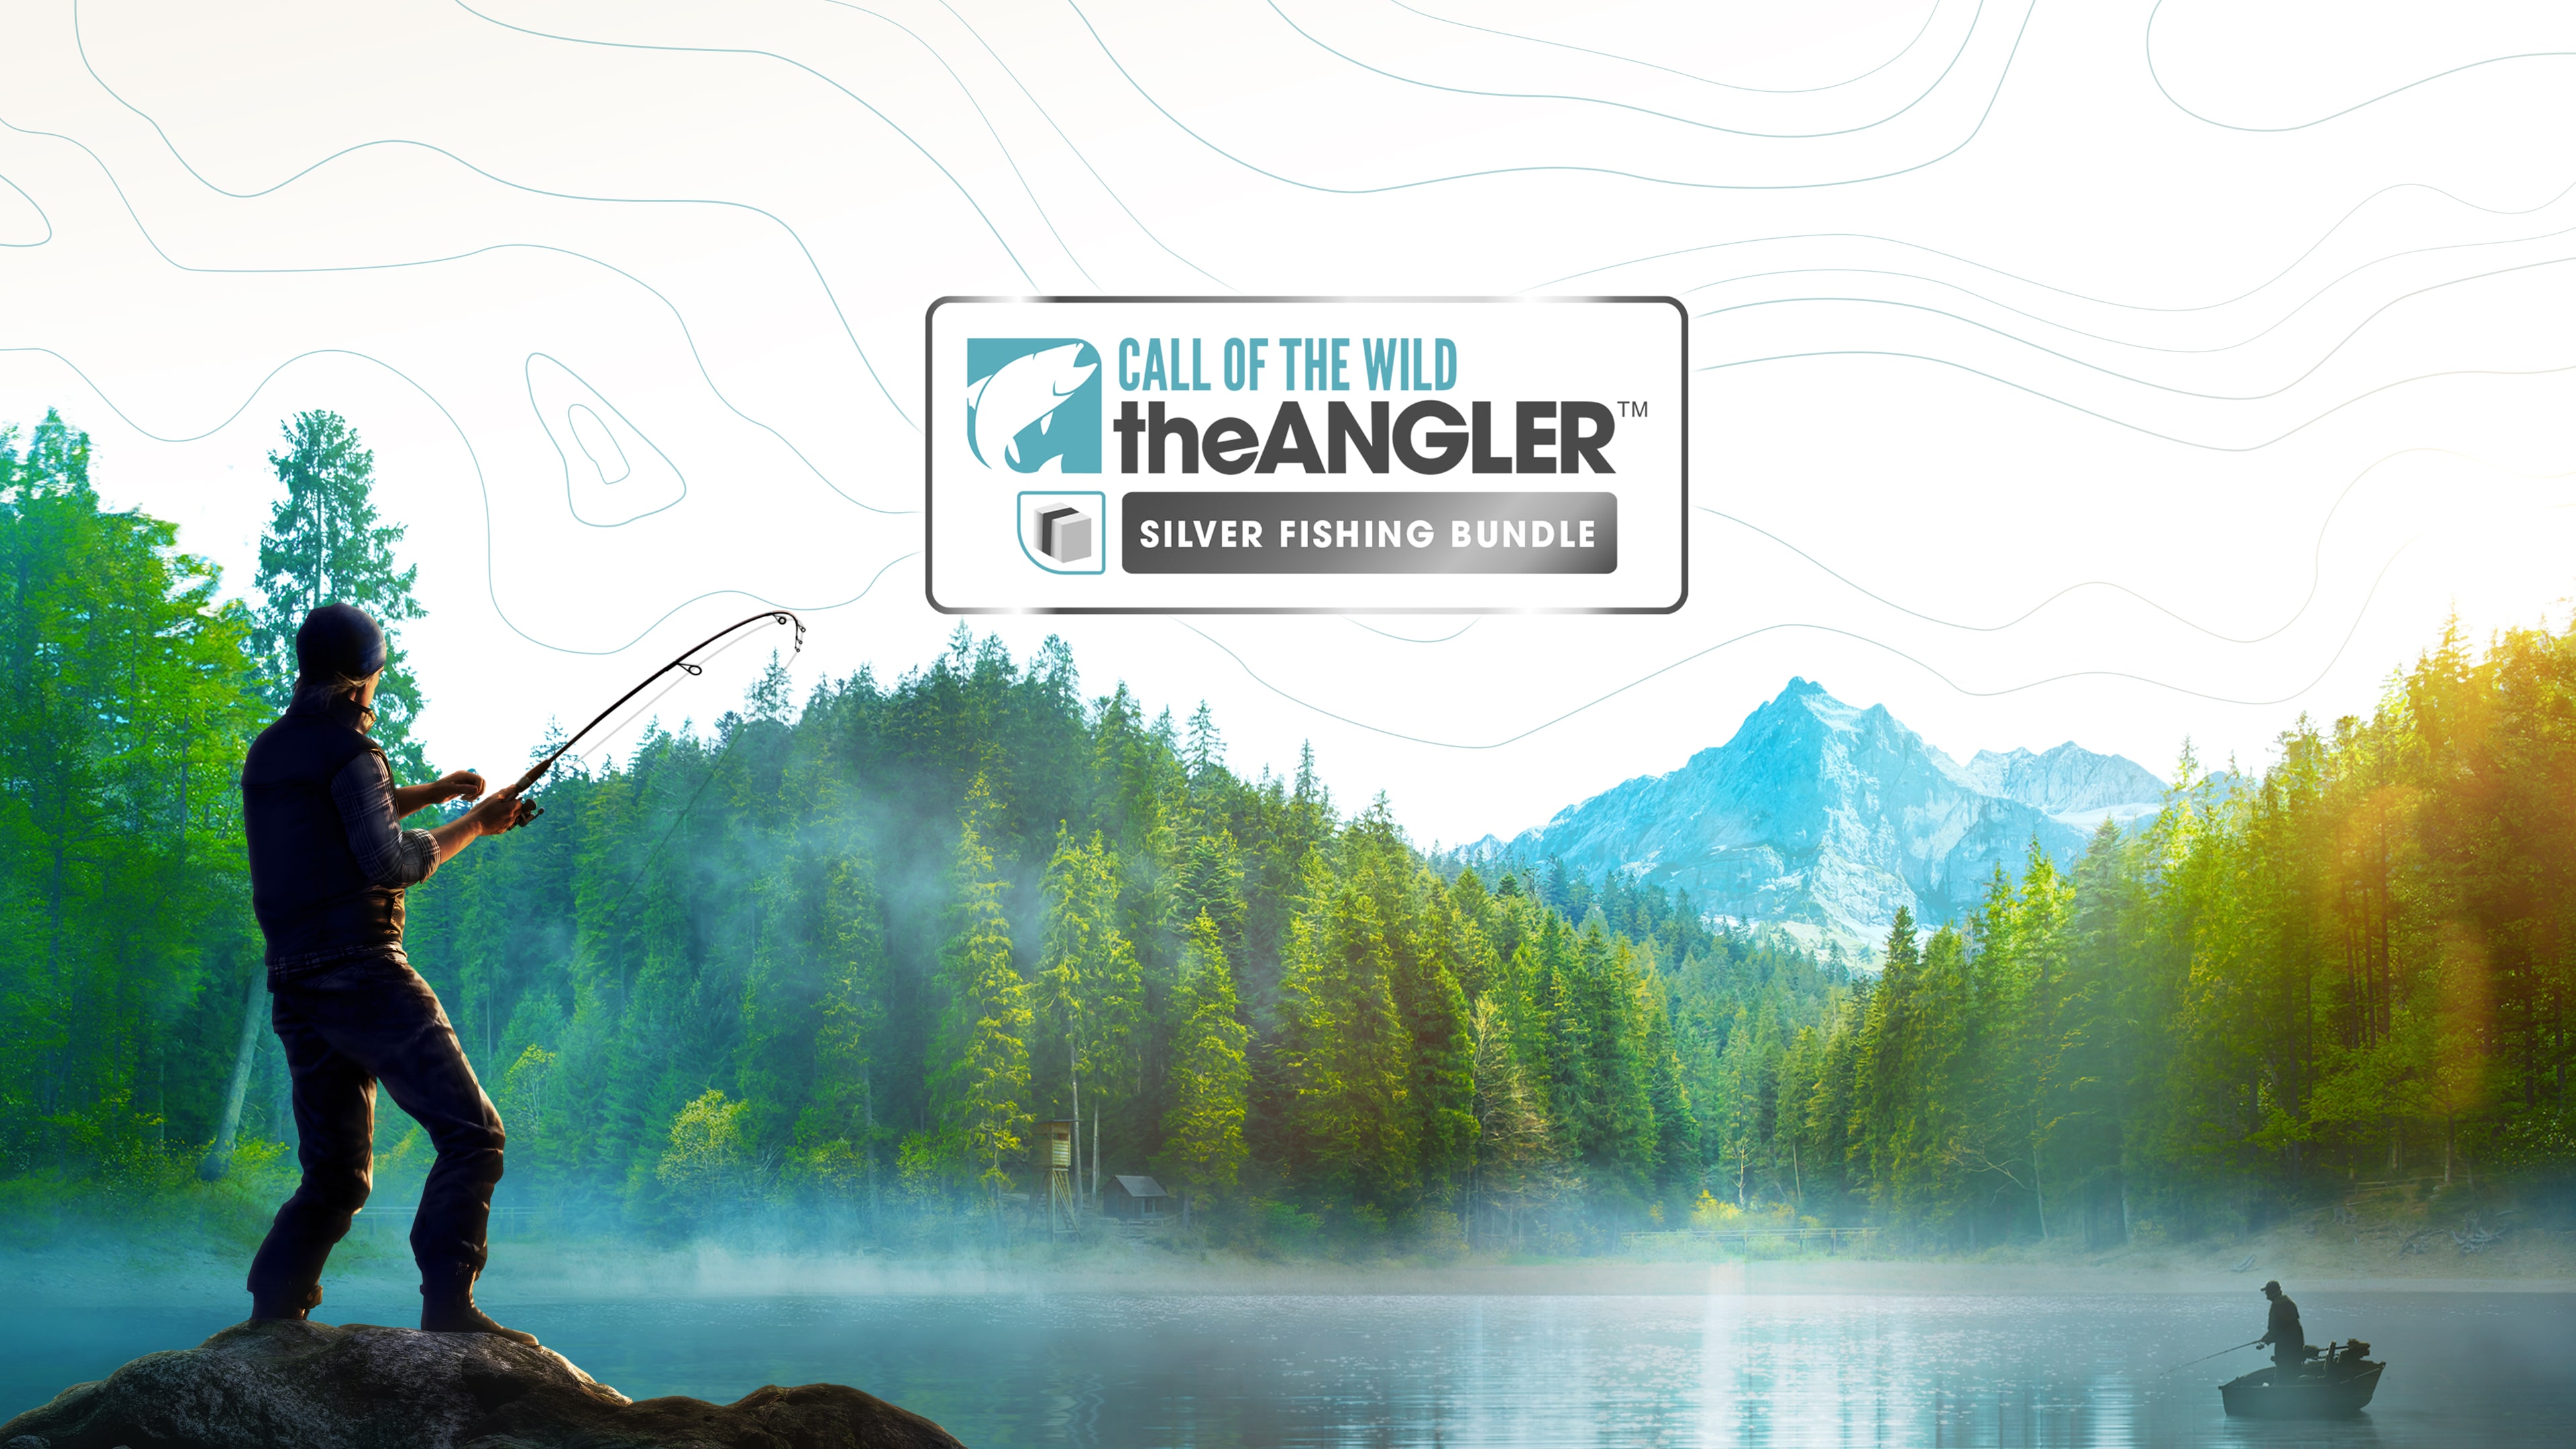 Call of the Wild: The Angler™ — Silver Fishing Bundle